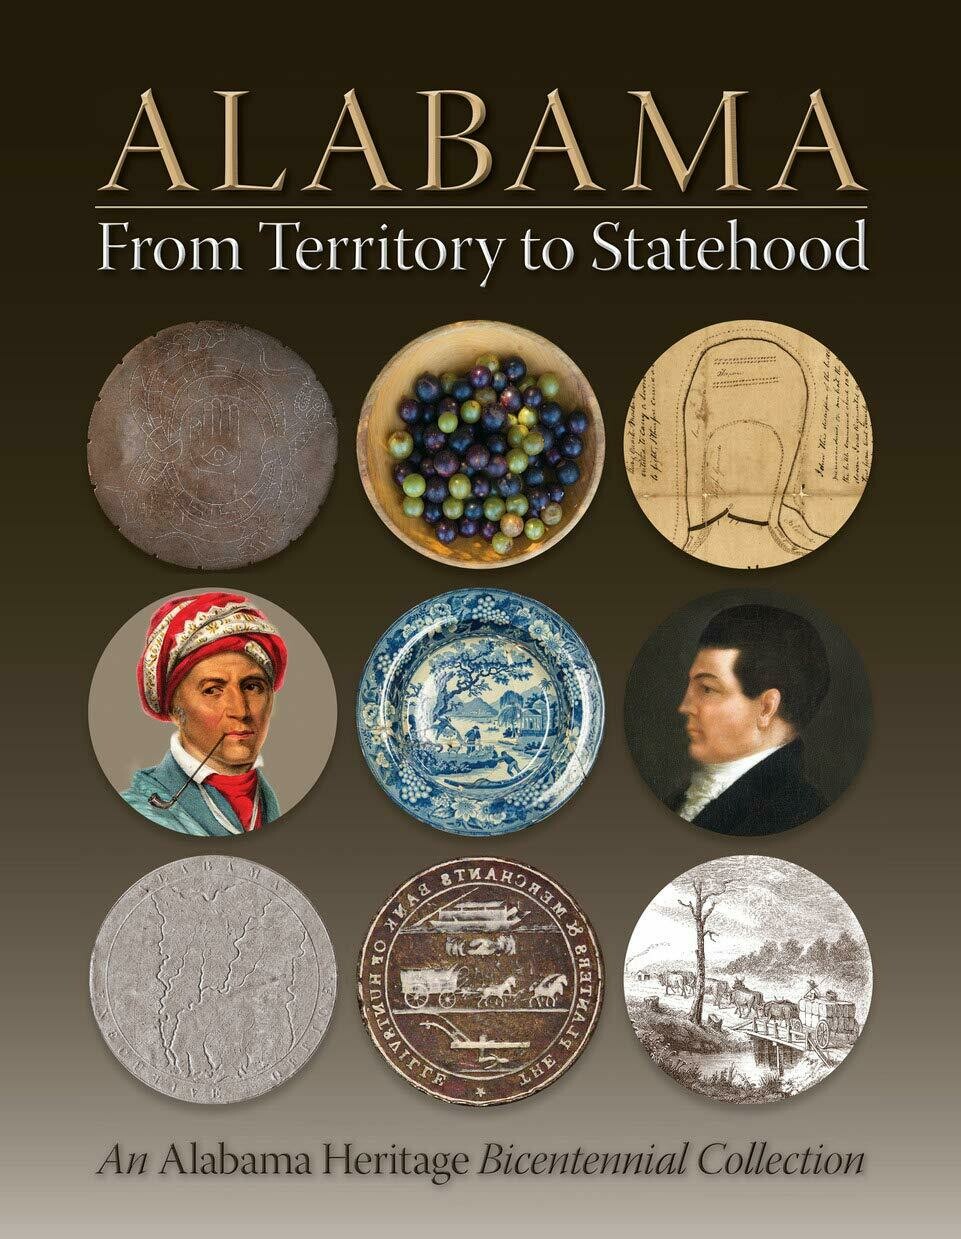 Alabama From Territory to Statehood: An Alabama Heritage Bicentennial Collection